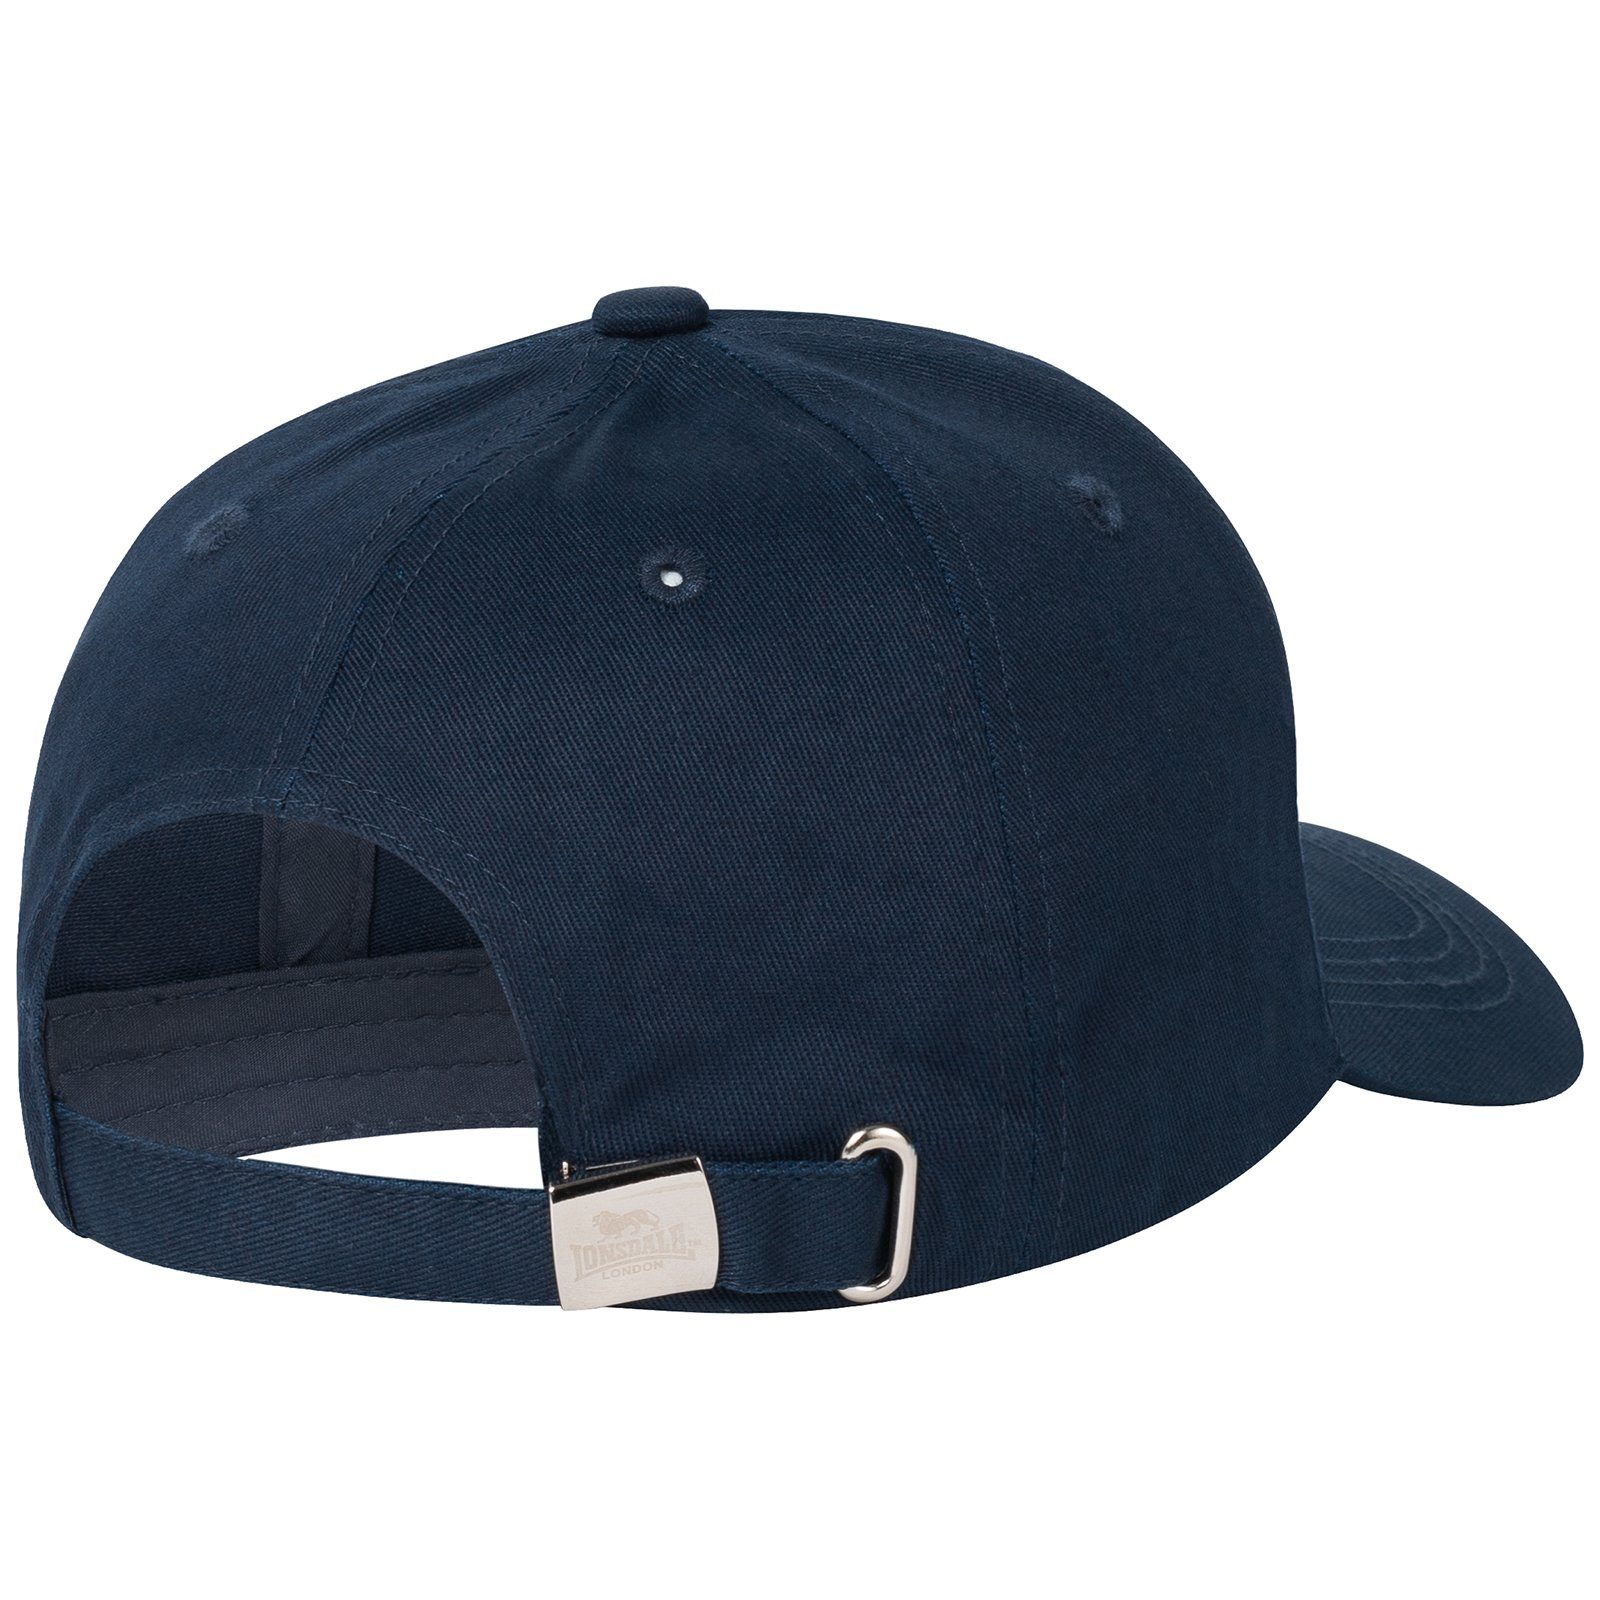 WILTSHIRE Lonsdale Cap Baseball